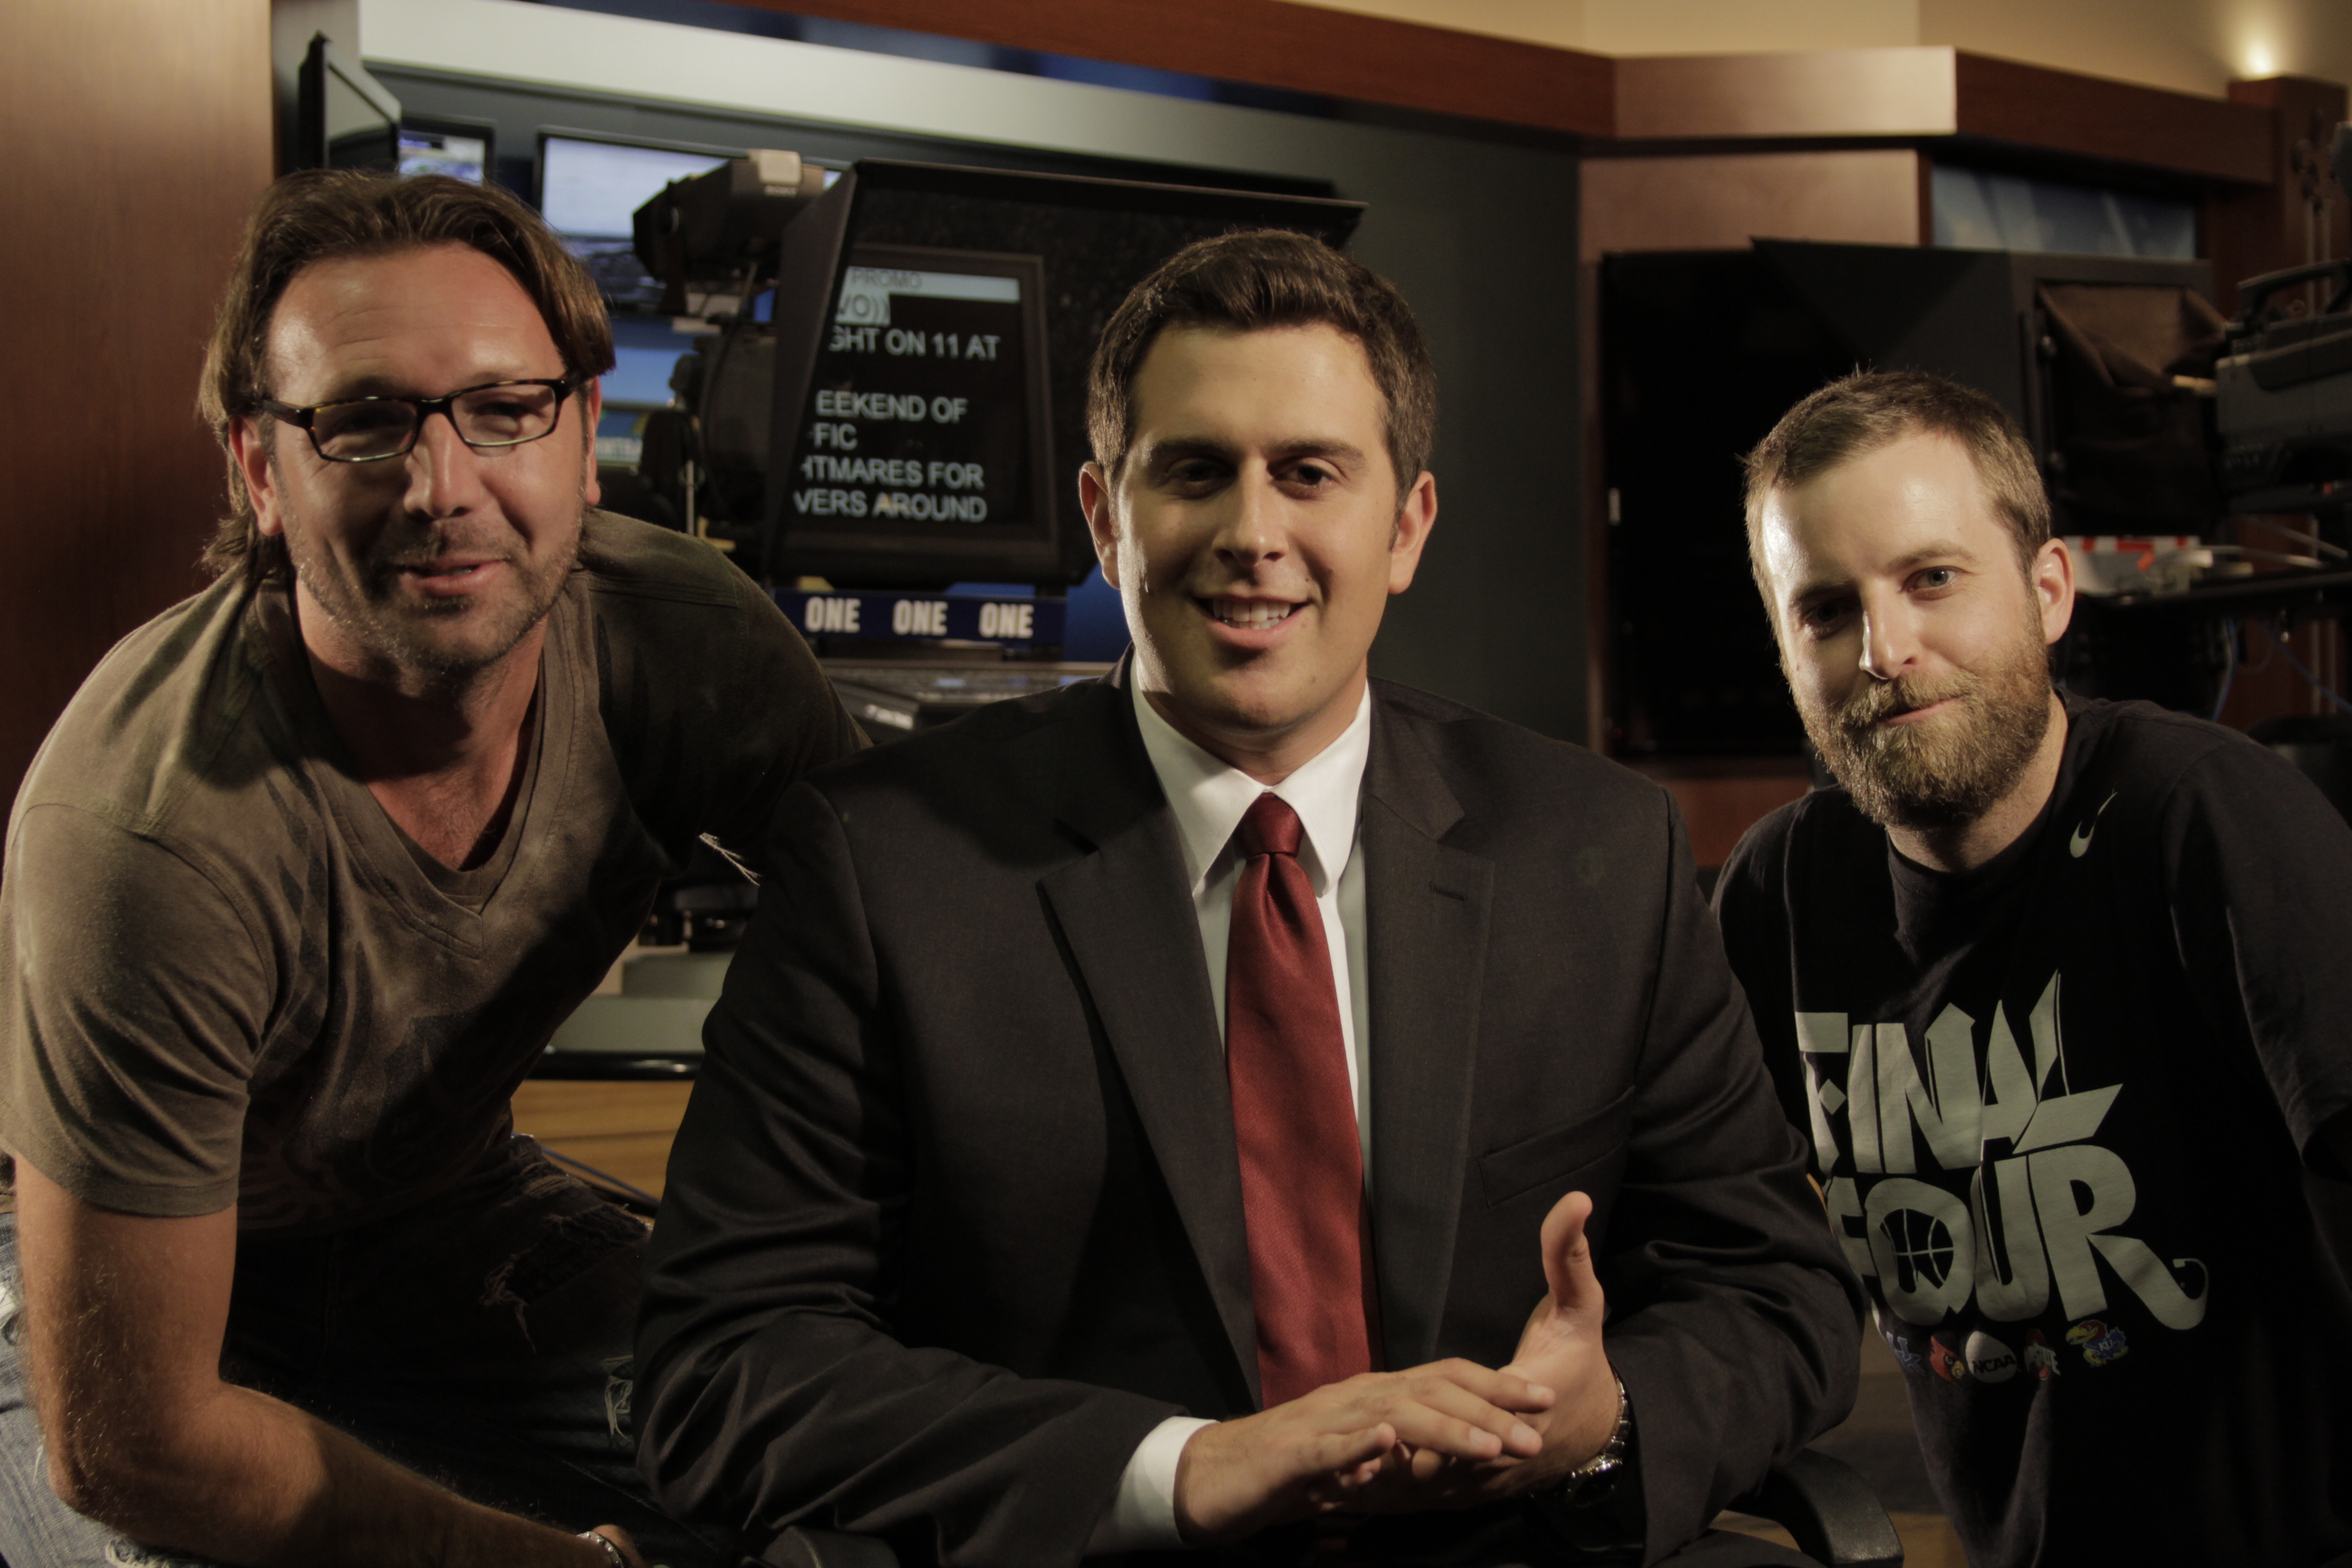 Producer Wm. Wade Smith, Adam Lefkoe, and Director Rory Owen Delaney filming for Red v Blue at WHAS Studios in Louisville, Kentucky